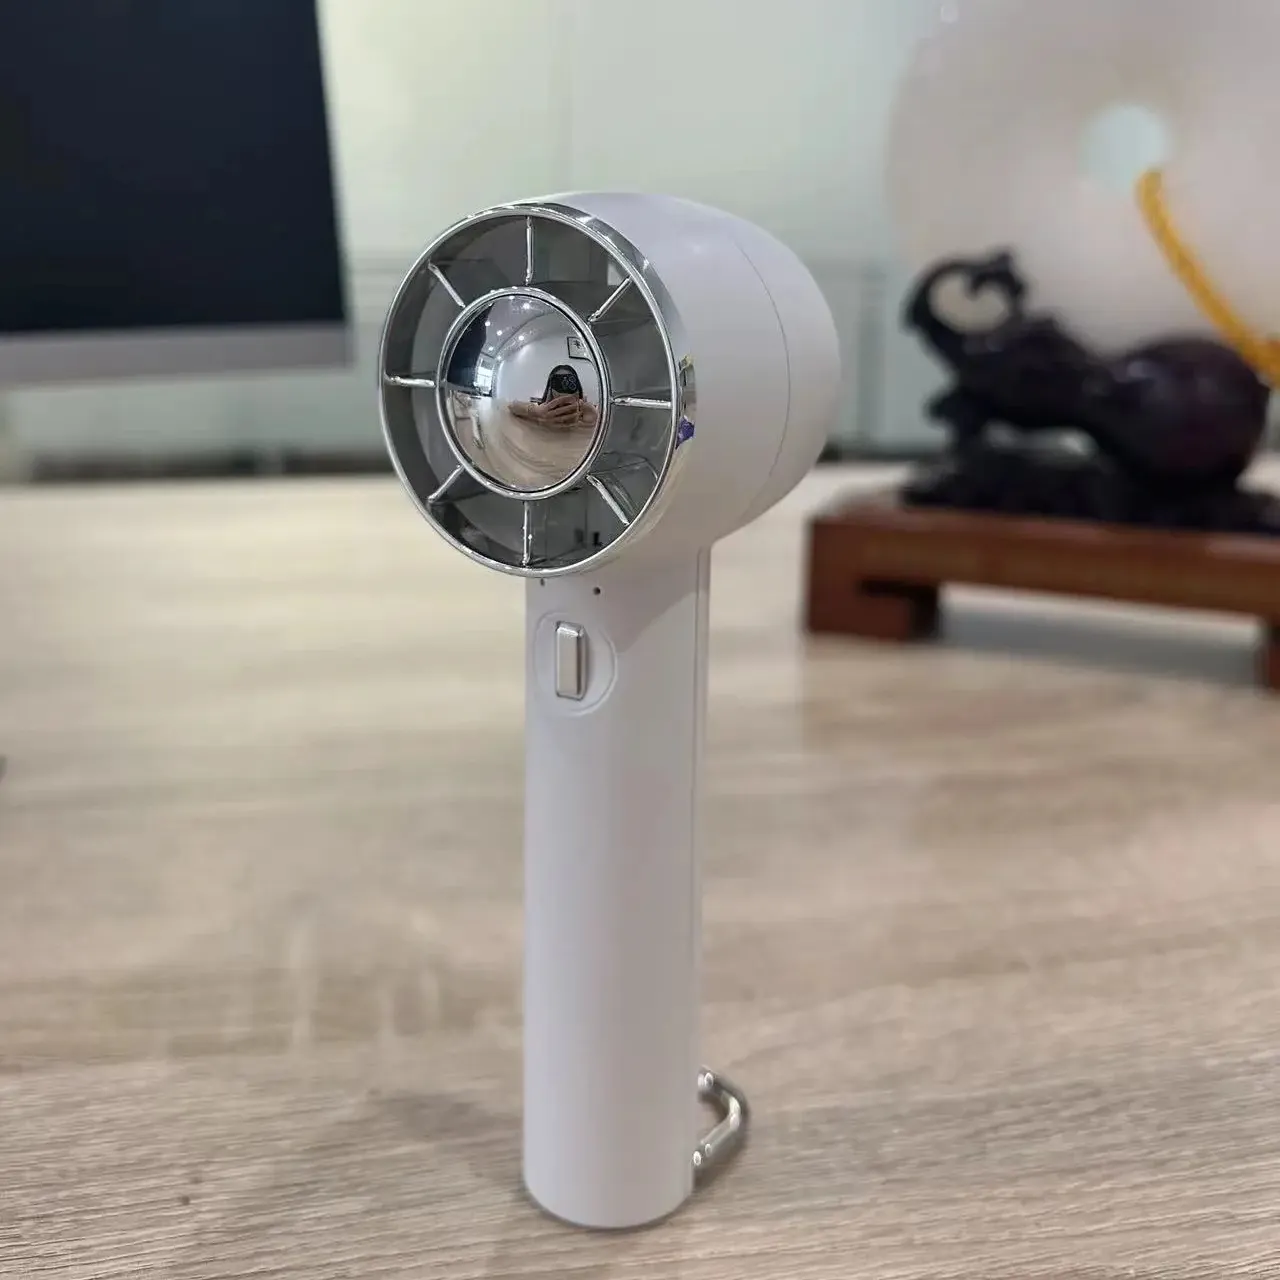 Shenzhen Factory hot sell Cold Compress bldc Fan Ice Cooling mini portable   wearable fans Handheld Fan with Hook